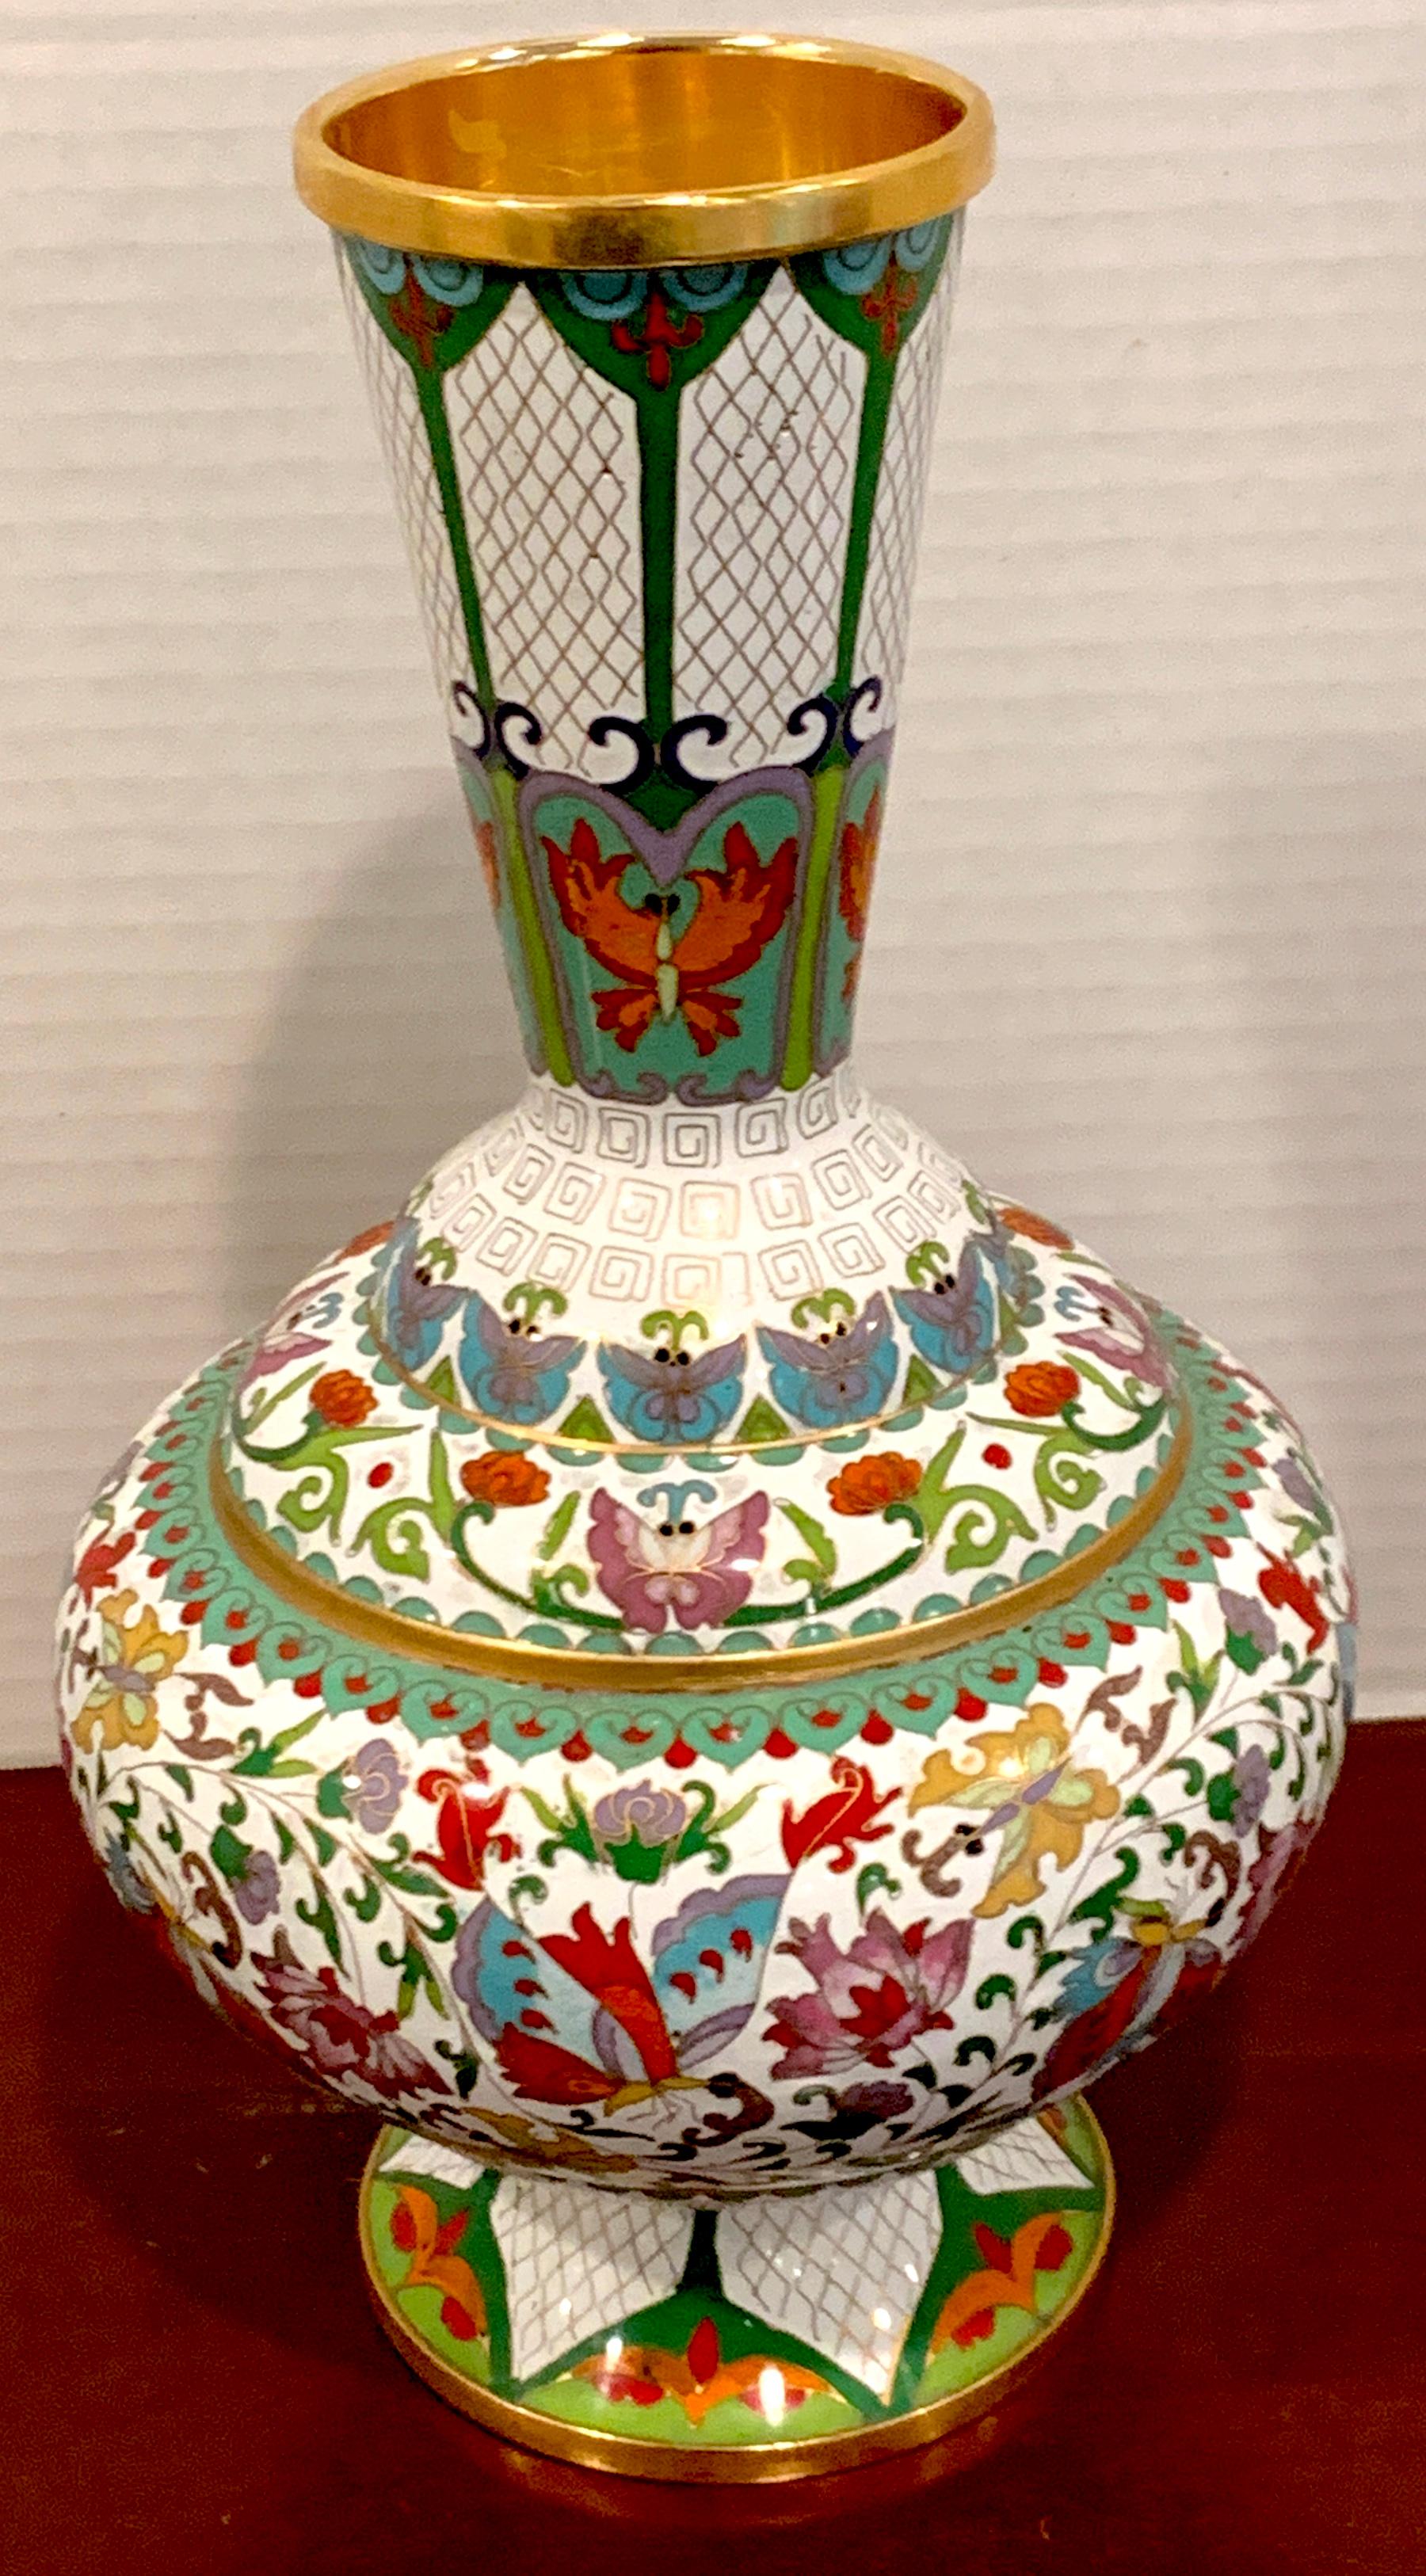 Modern Chinese cloisonné vase, white background and butterflies, enameled with numerous butterflies and floral reserves, standing 12.5